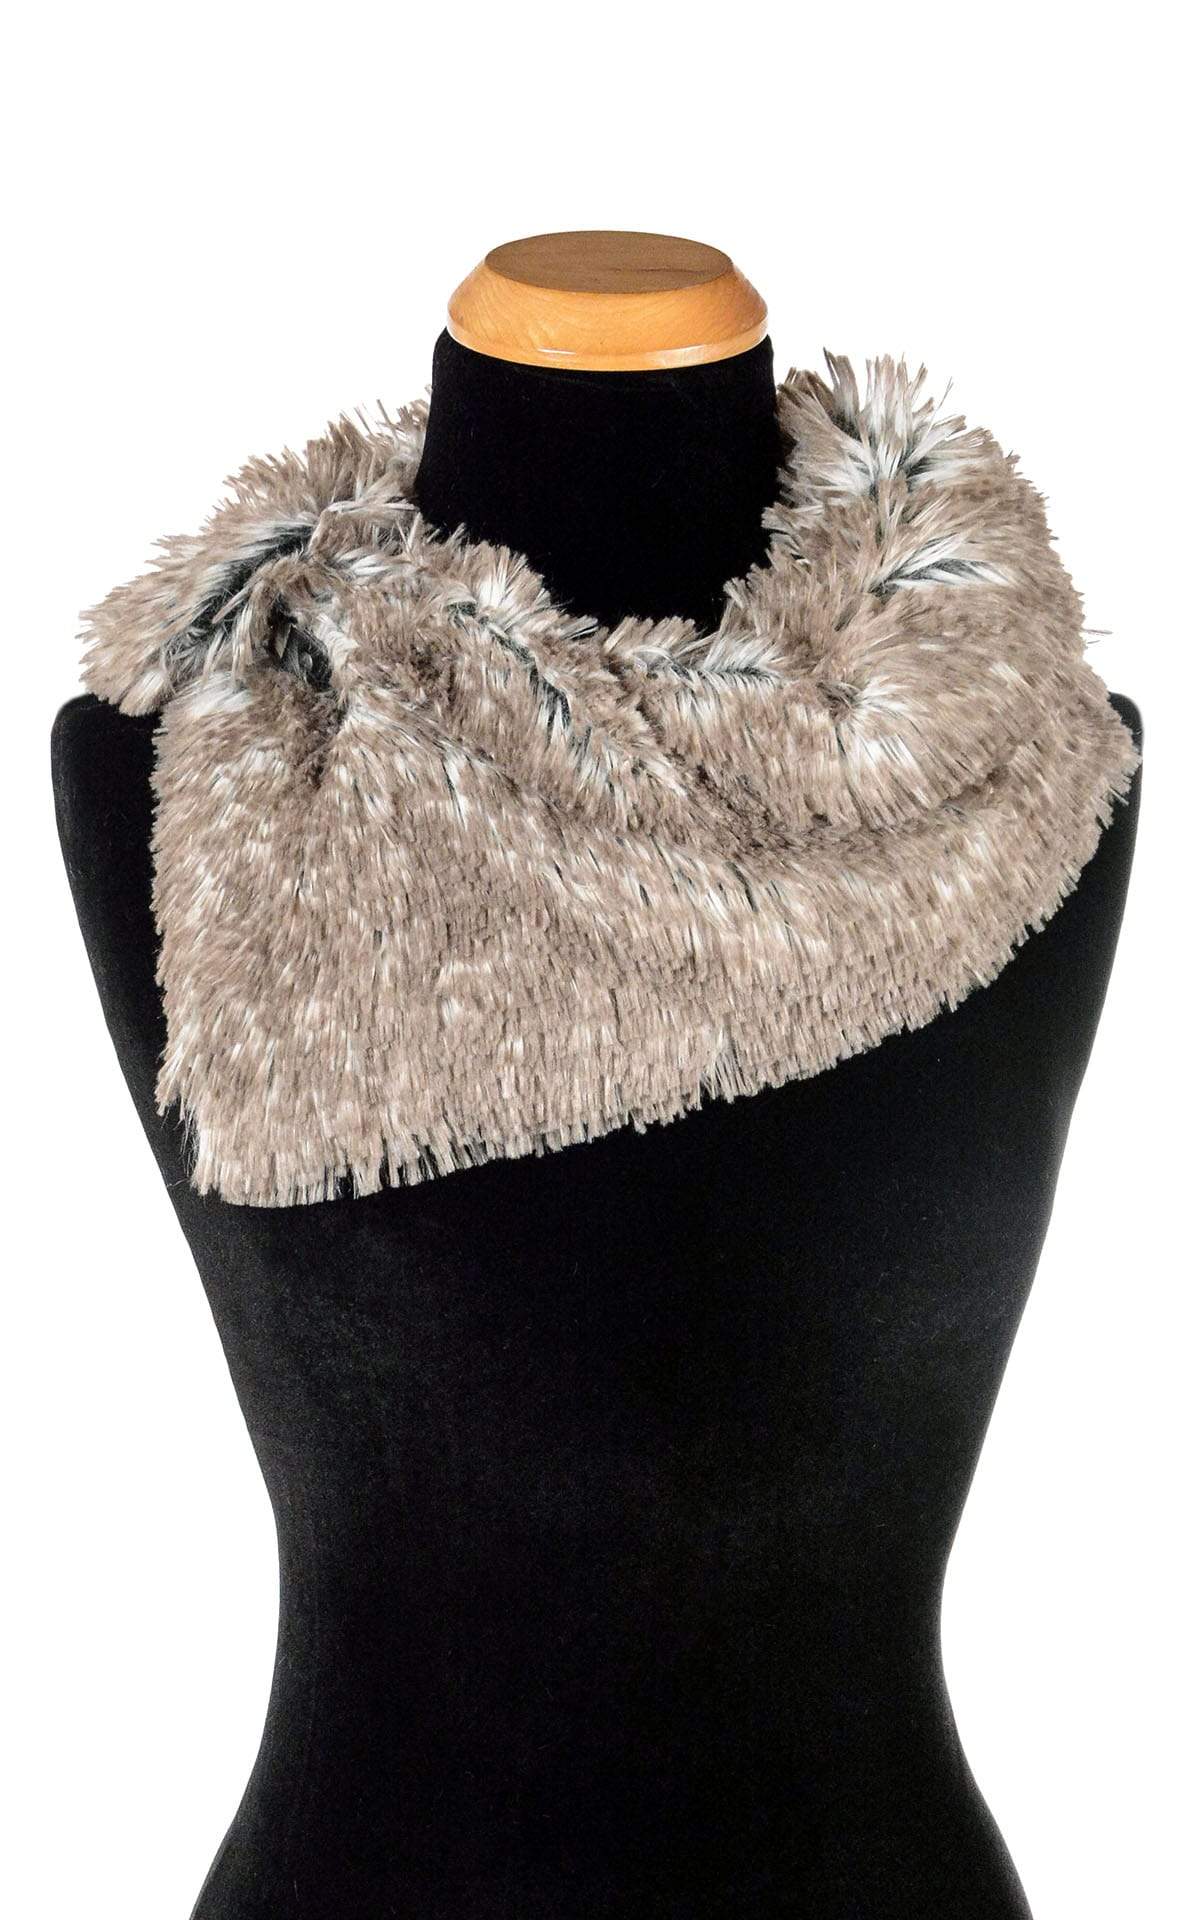 Buckle Scarf in Arctic Fox Faux Fur, shown buckled and worn with buckle on right side.